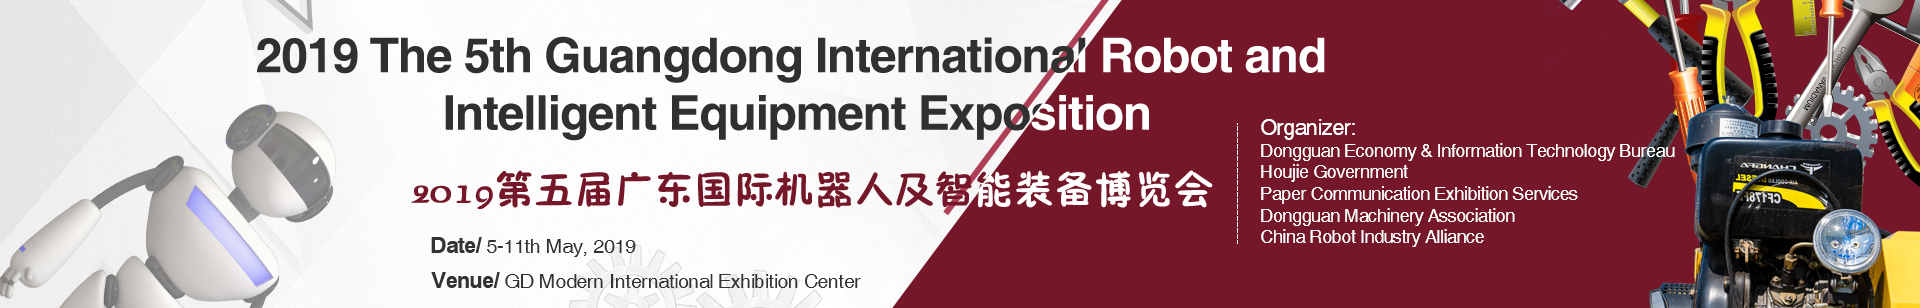 2019 Guangdong Intl Robot and Intelligent Equipment Exposition